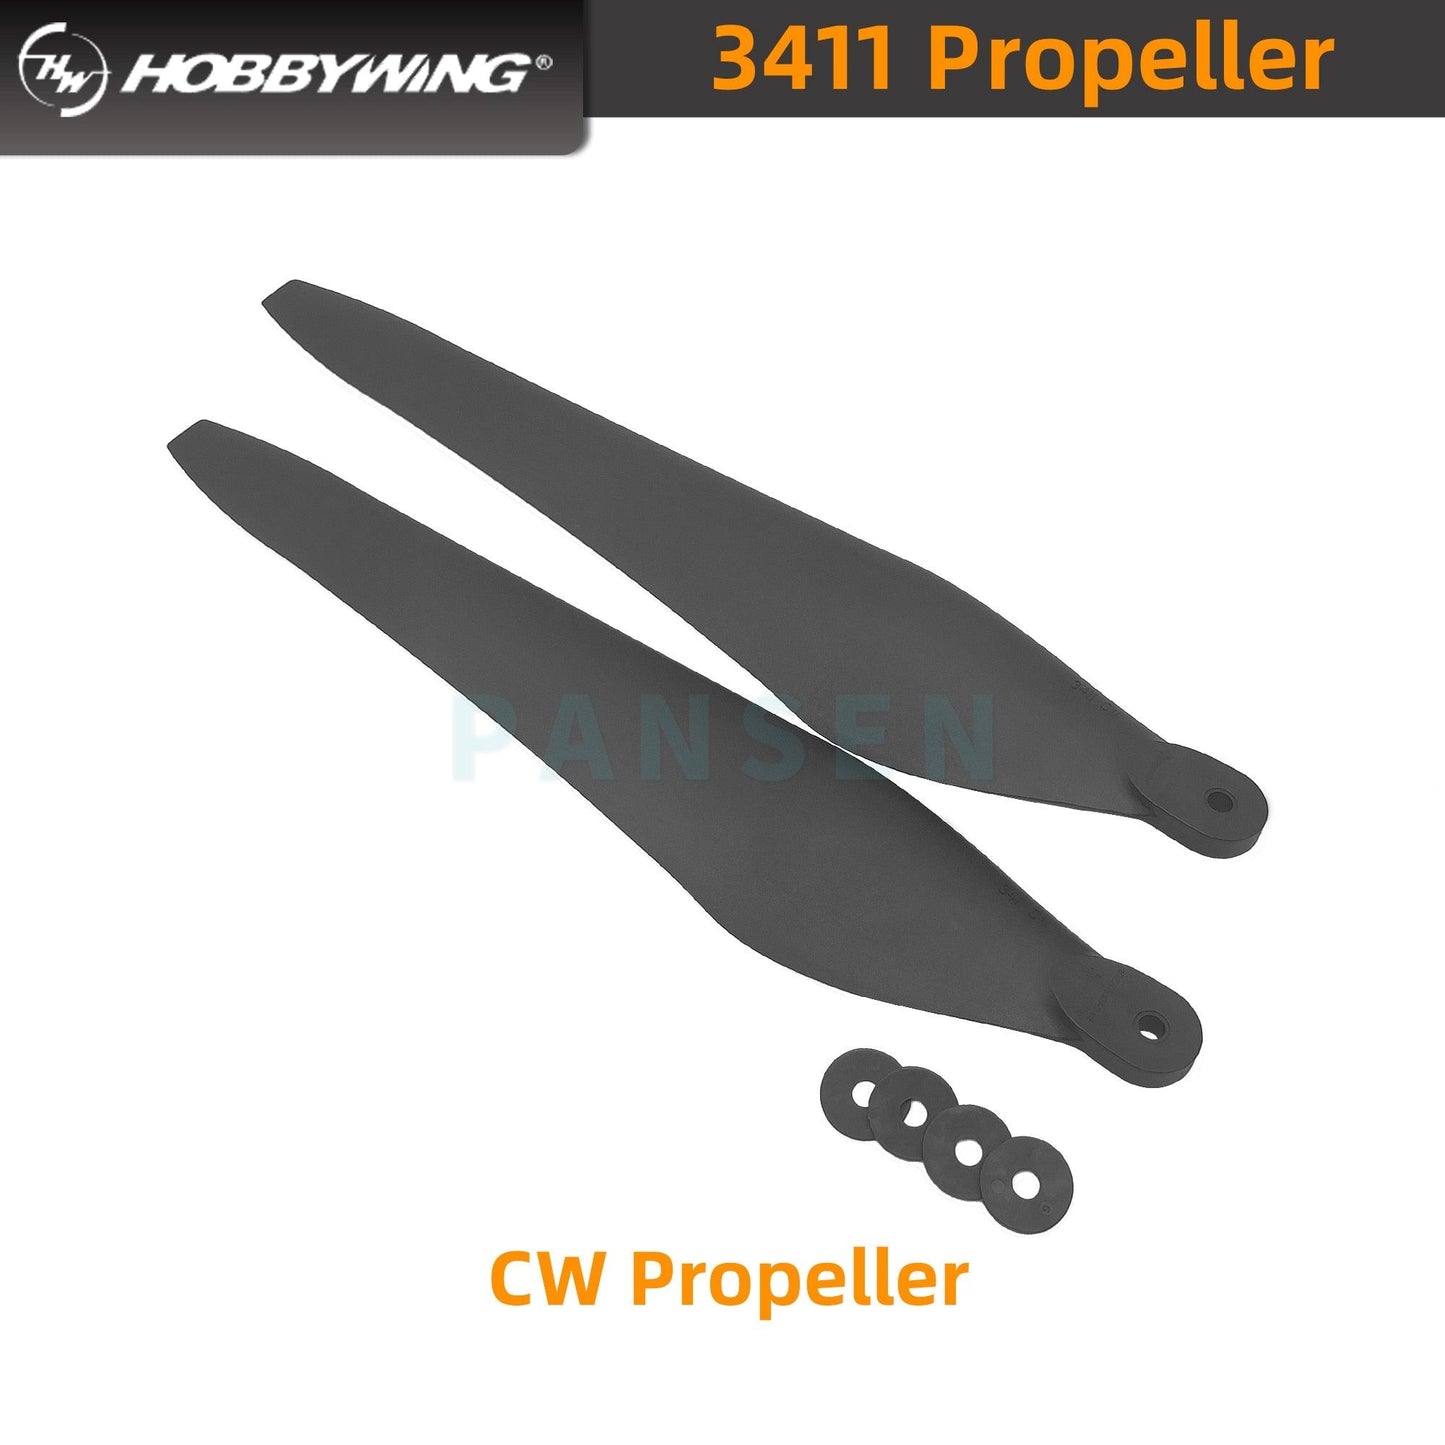 Original Hobbywing3411 CW CCW FOC Propeller, Original Hobbywing FOC folding Carbon Fiber Plastic 3411 CW CCW Propeller for the Power System of X9 Motor Agricultural Drone - RCDrone